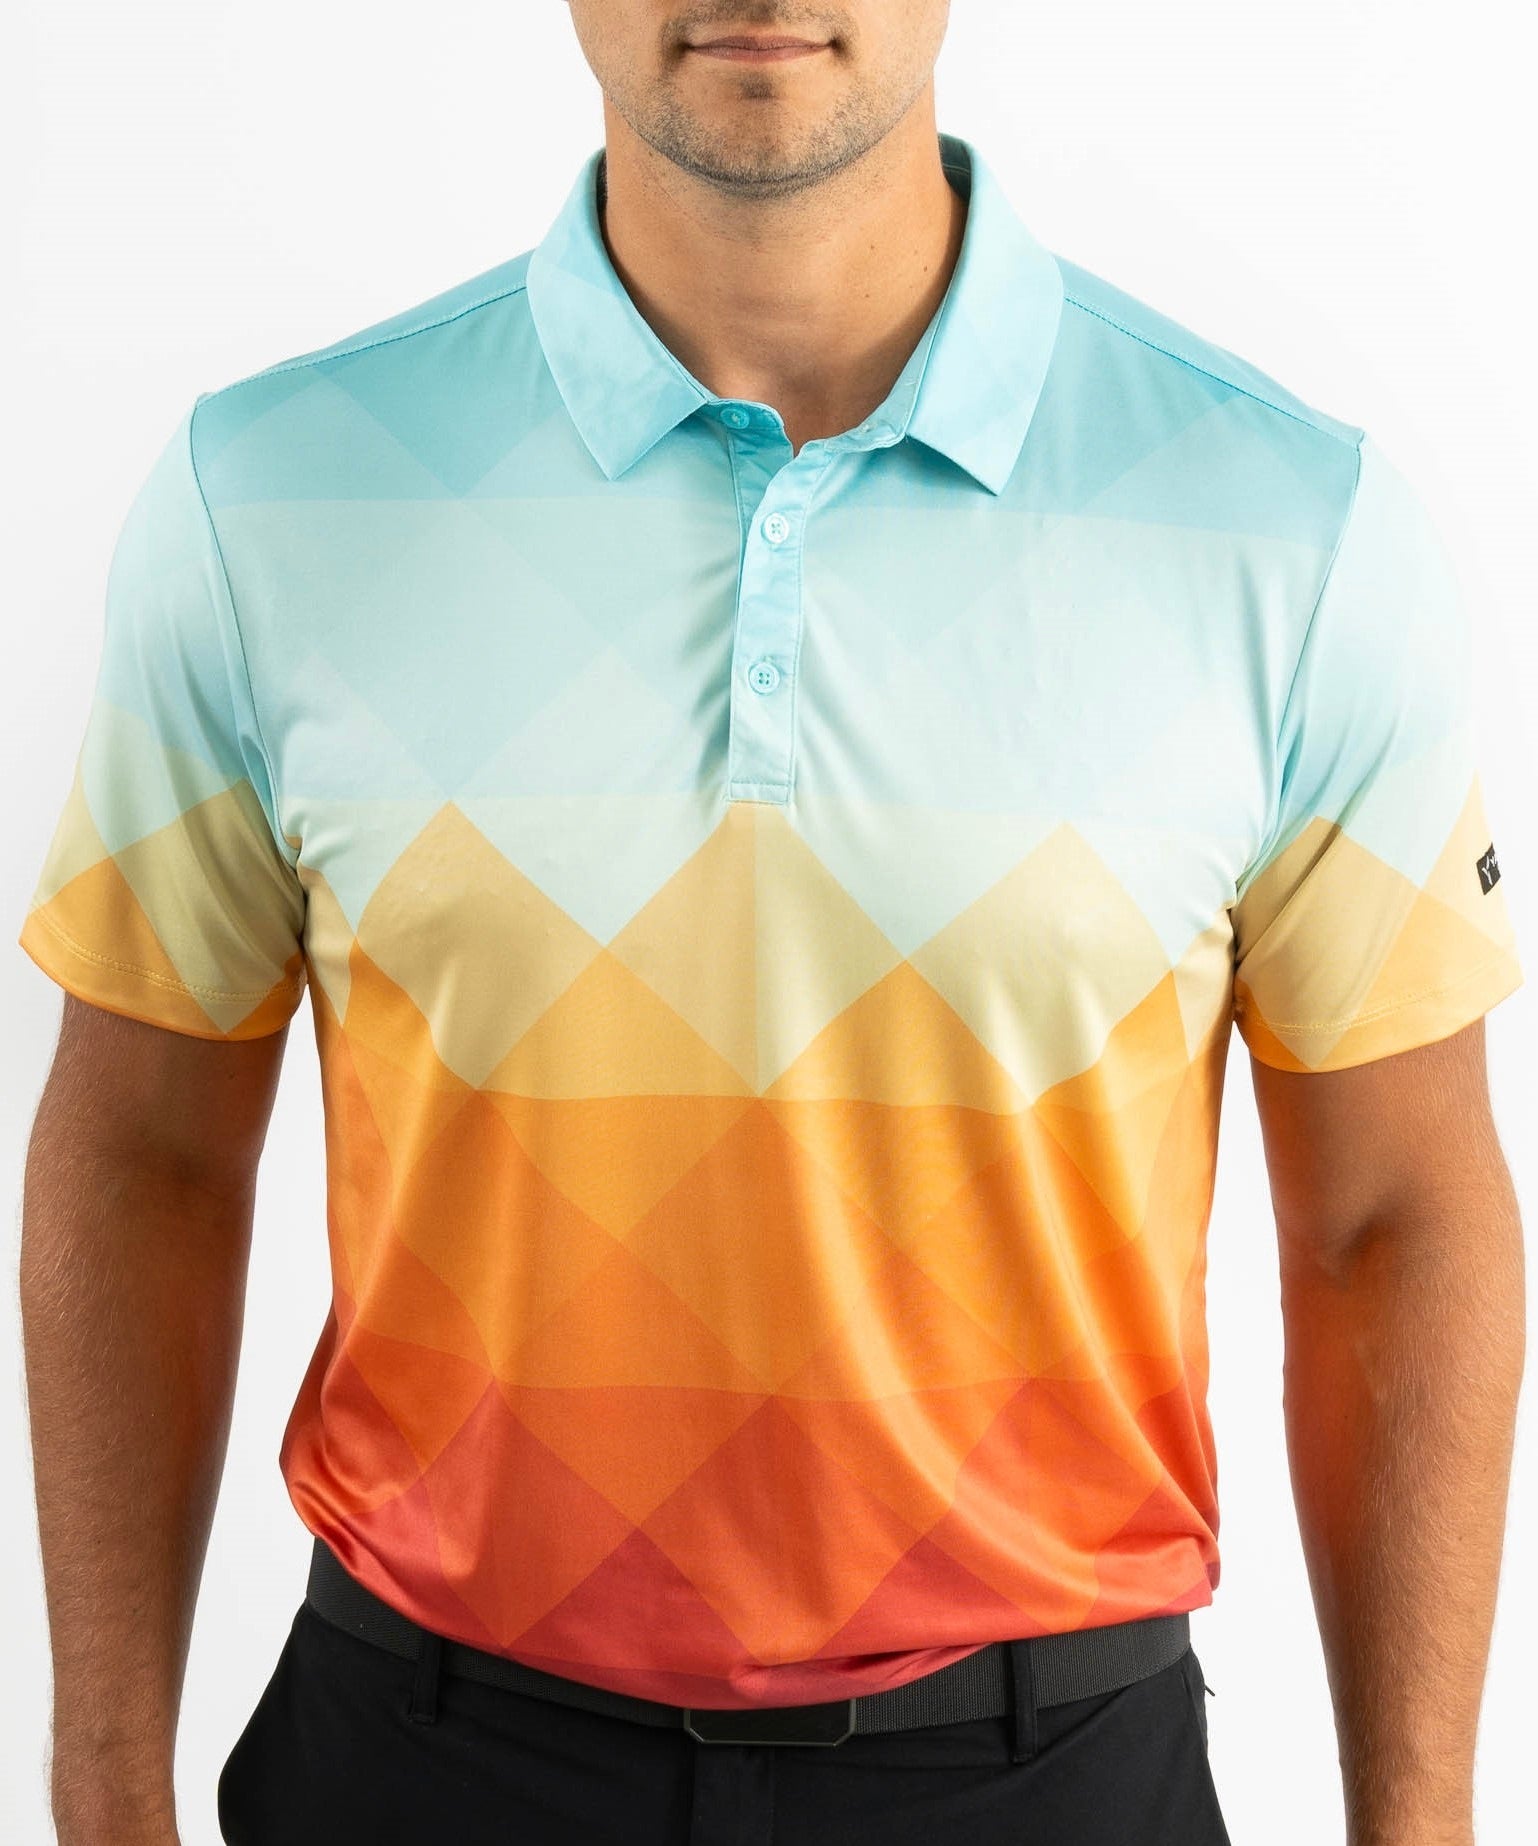 Mens Sunset Polo - Polos. Only Seriously Arizona Great Yatta Golf – $39.95. Sunset